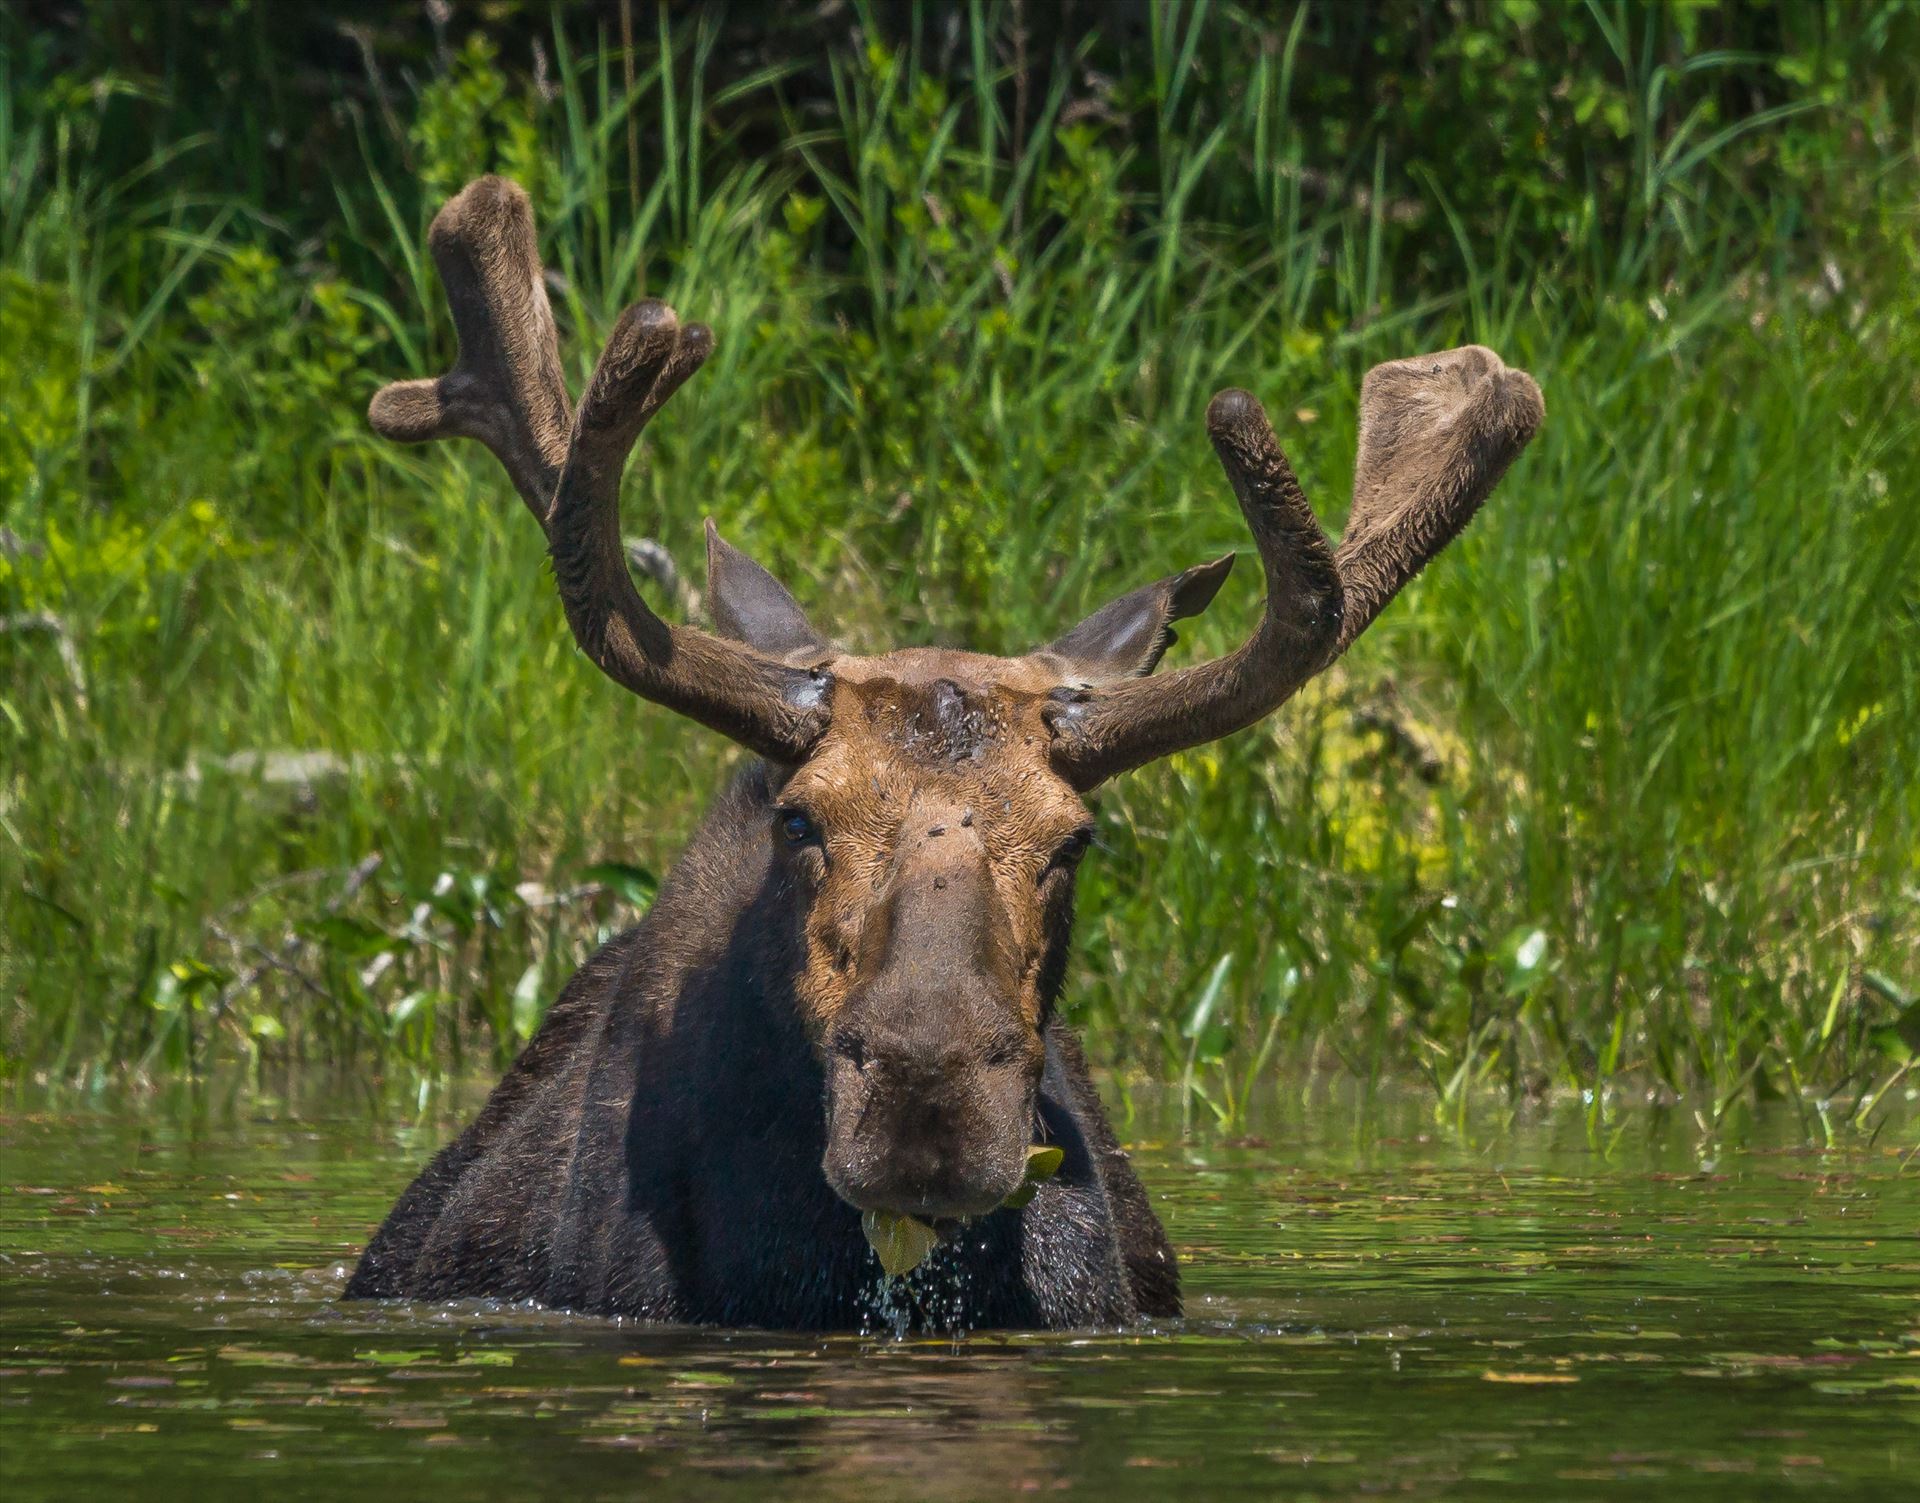 Bull Moose - Taken in June 2015 in Northern Maine, USA by Buckmaster